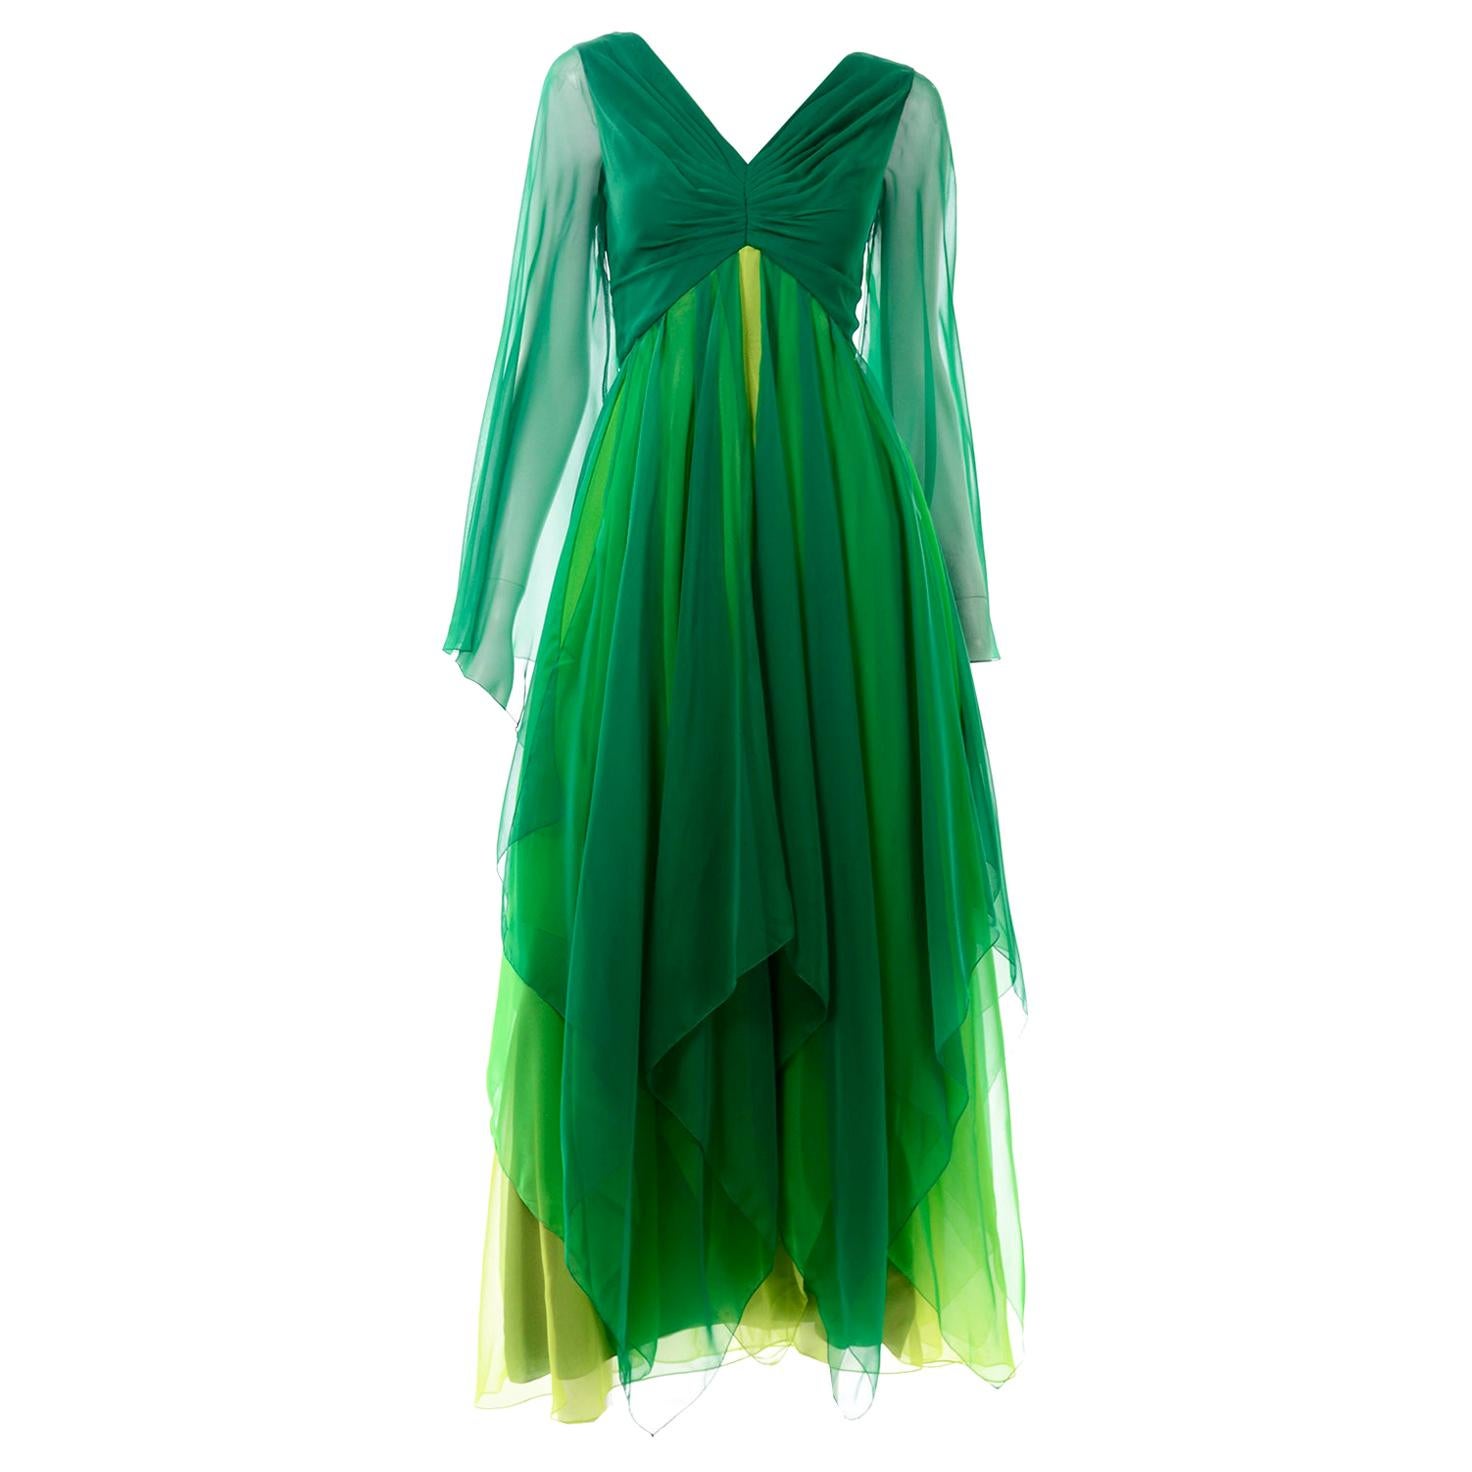 Vintage Layered Flowing Evening Dress in Multi Shades of Green Silk Chiffon  For Sale